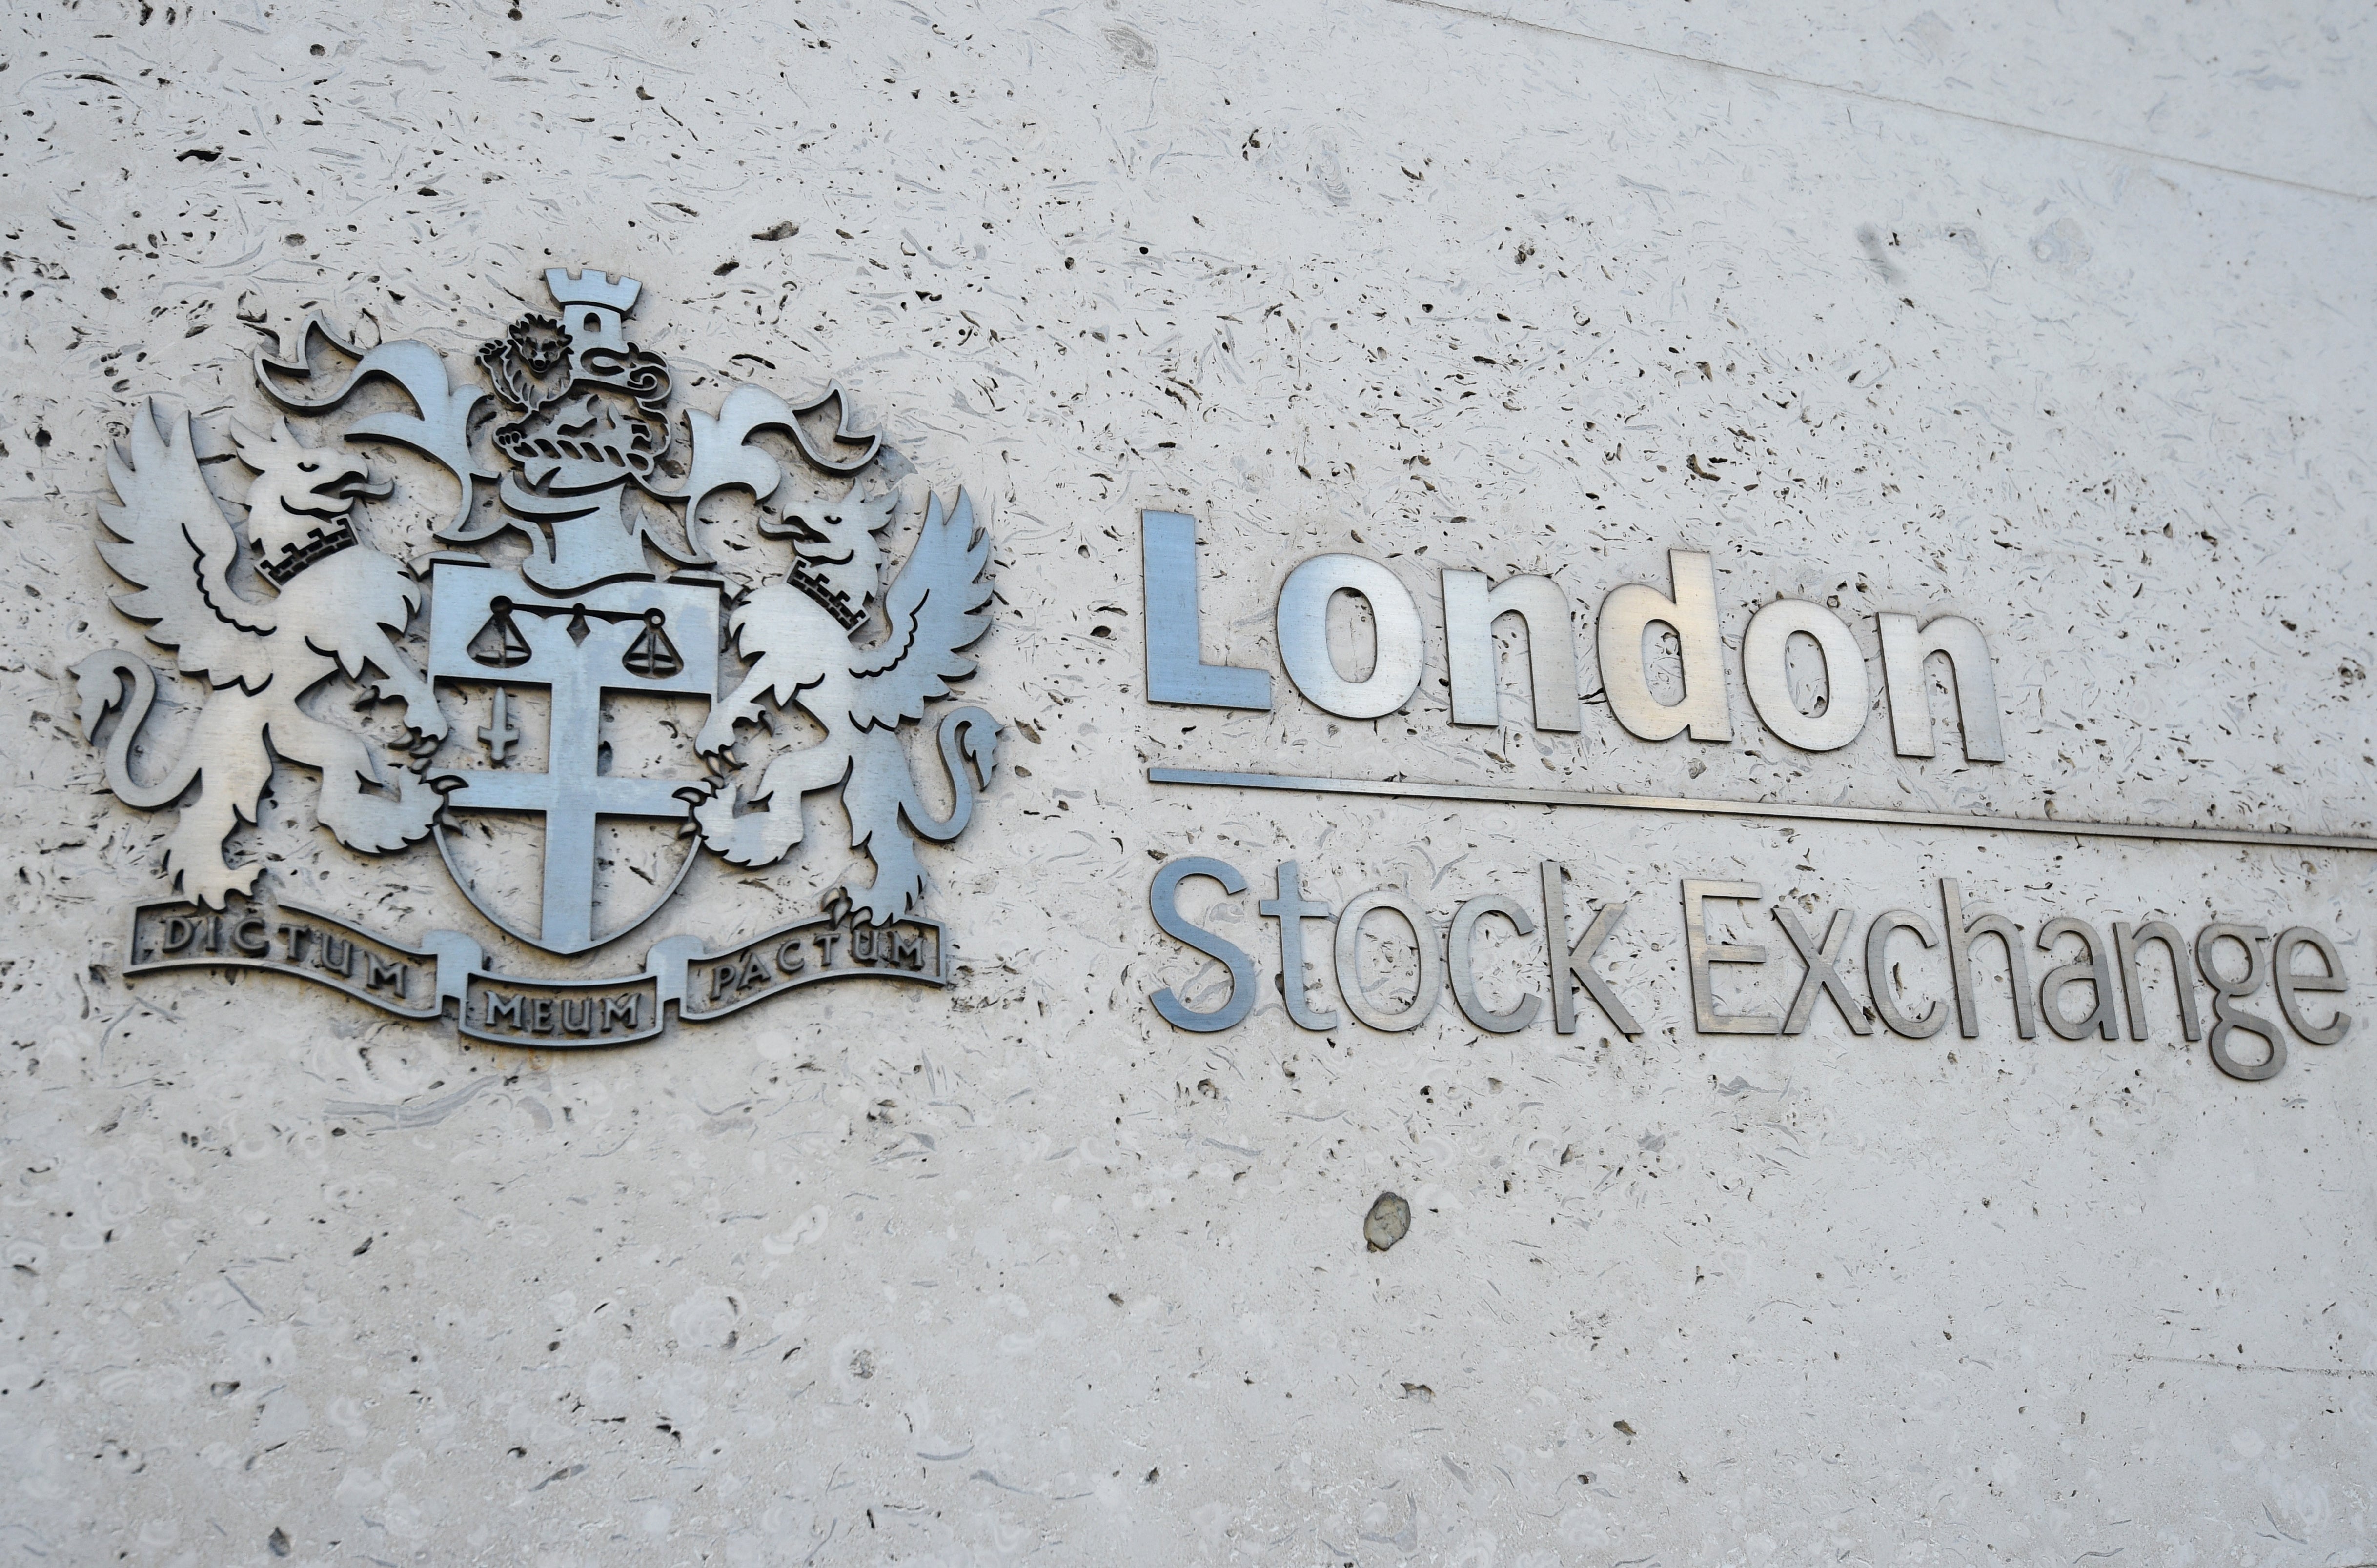 FTSE 100 edges higher on Wednesday helped by banking stocks